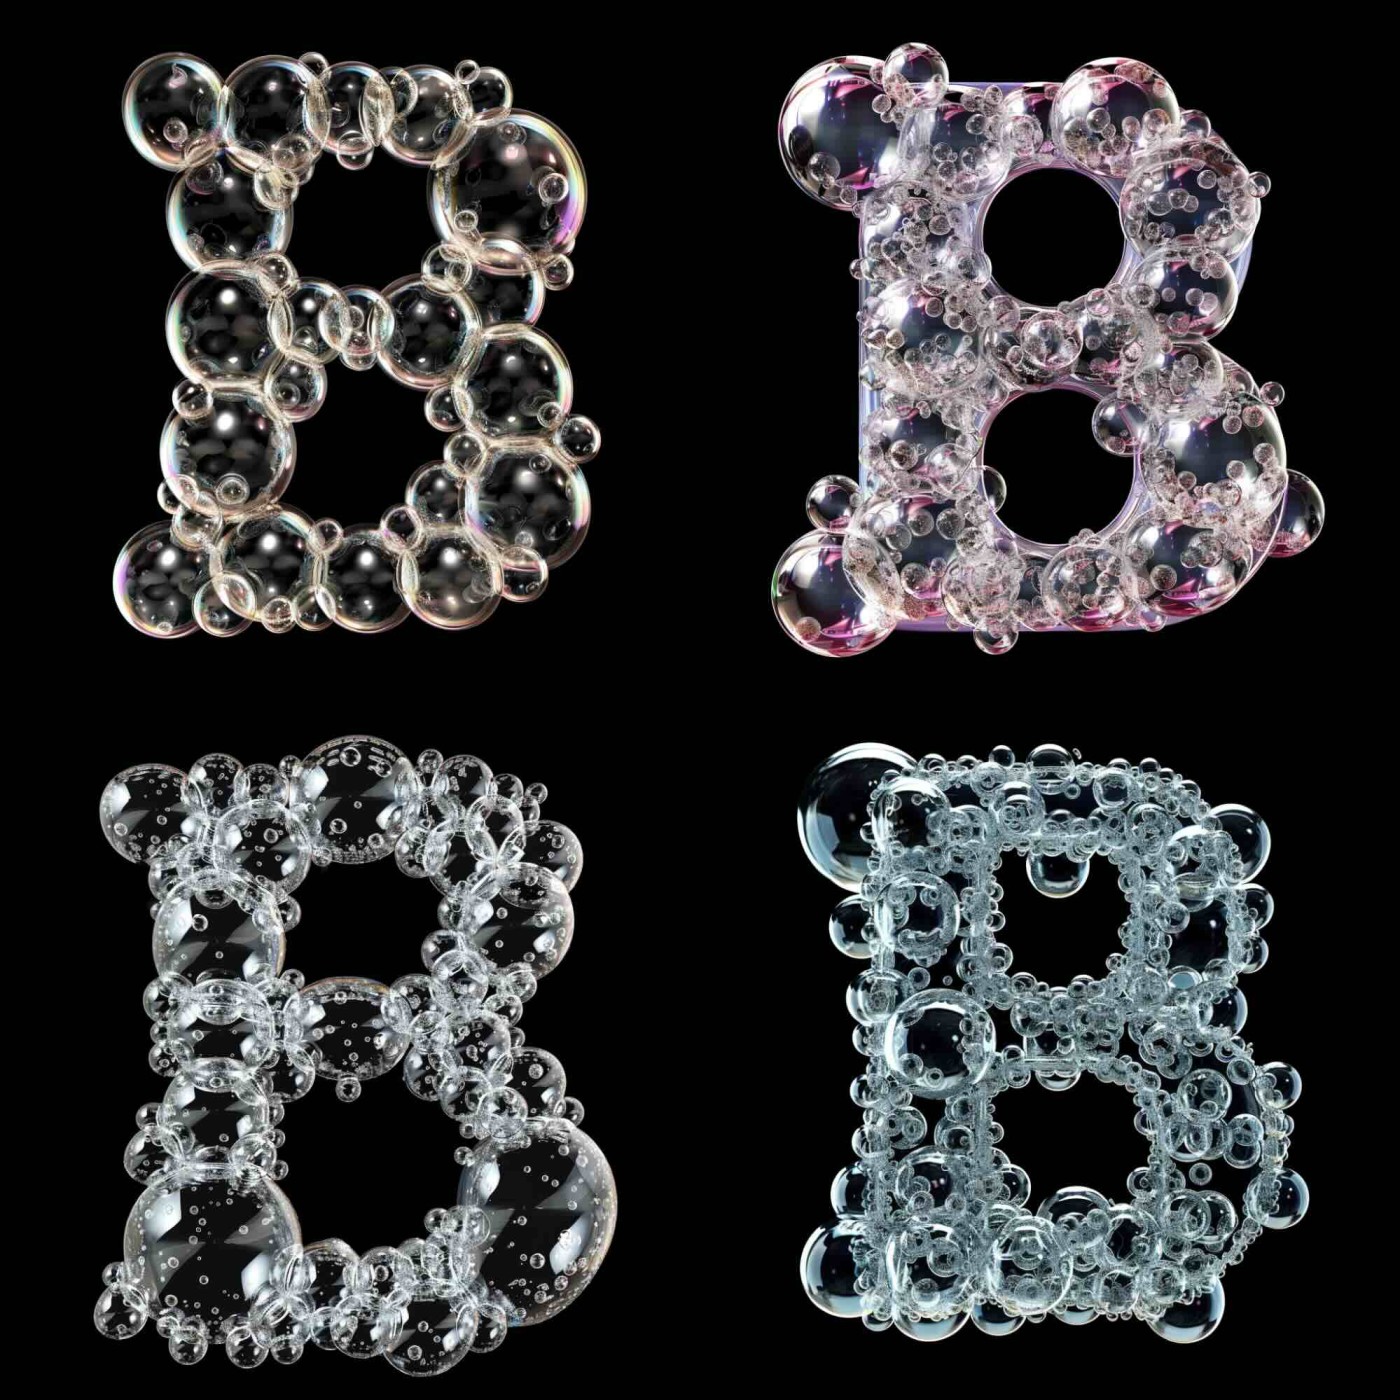 The letter 'B' made of bubbles